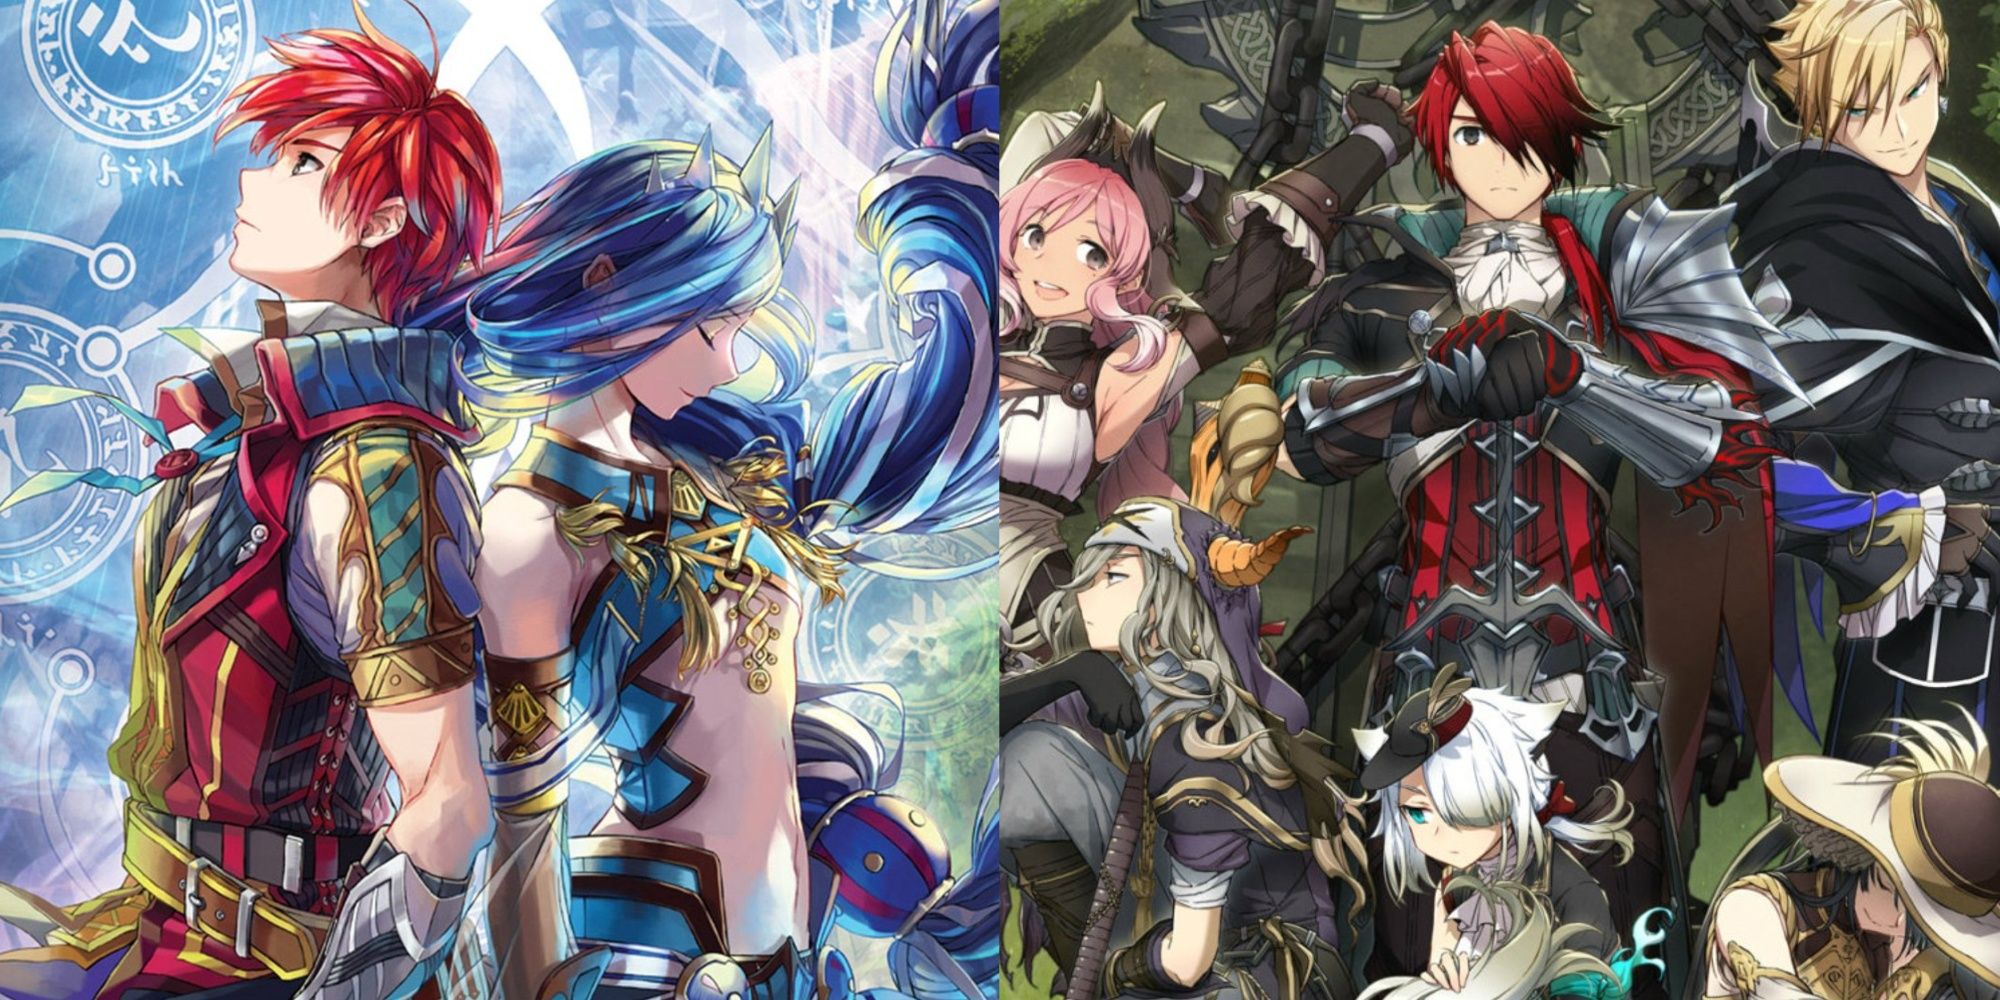 Ys 8 and Ys 9 Adol and main characters